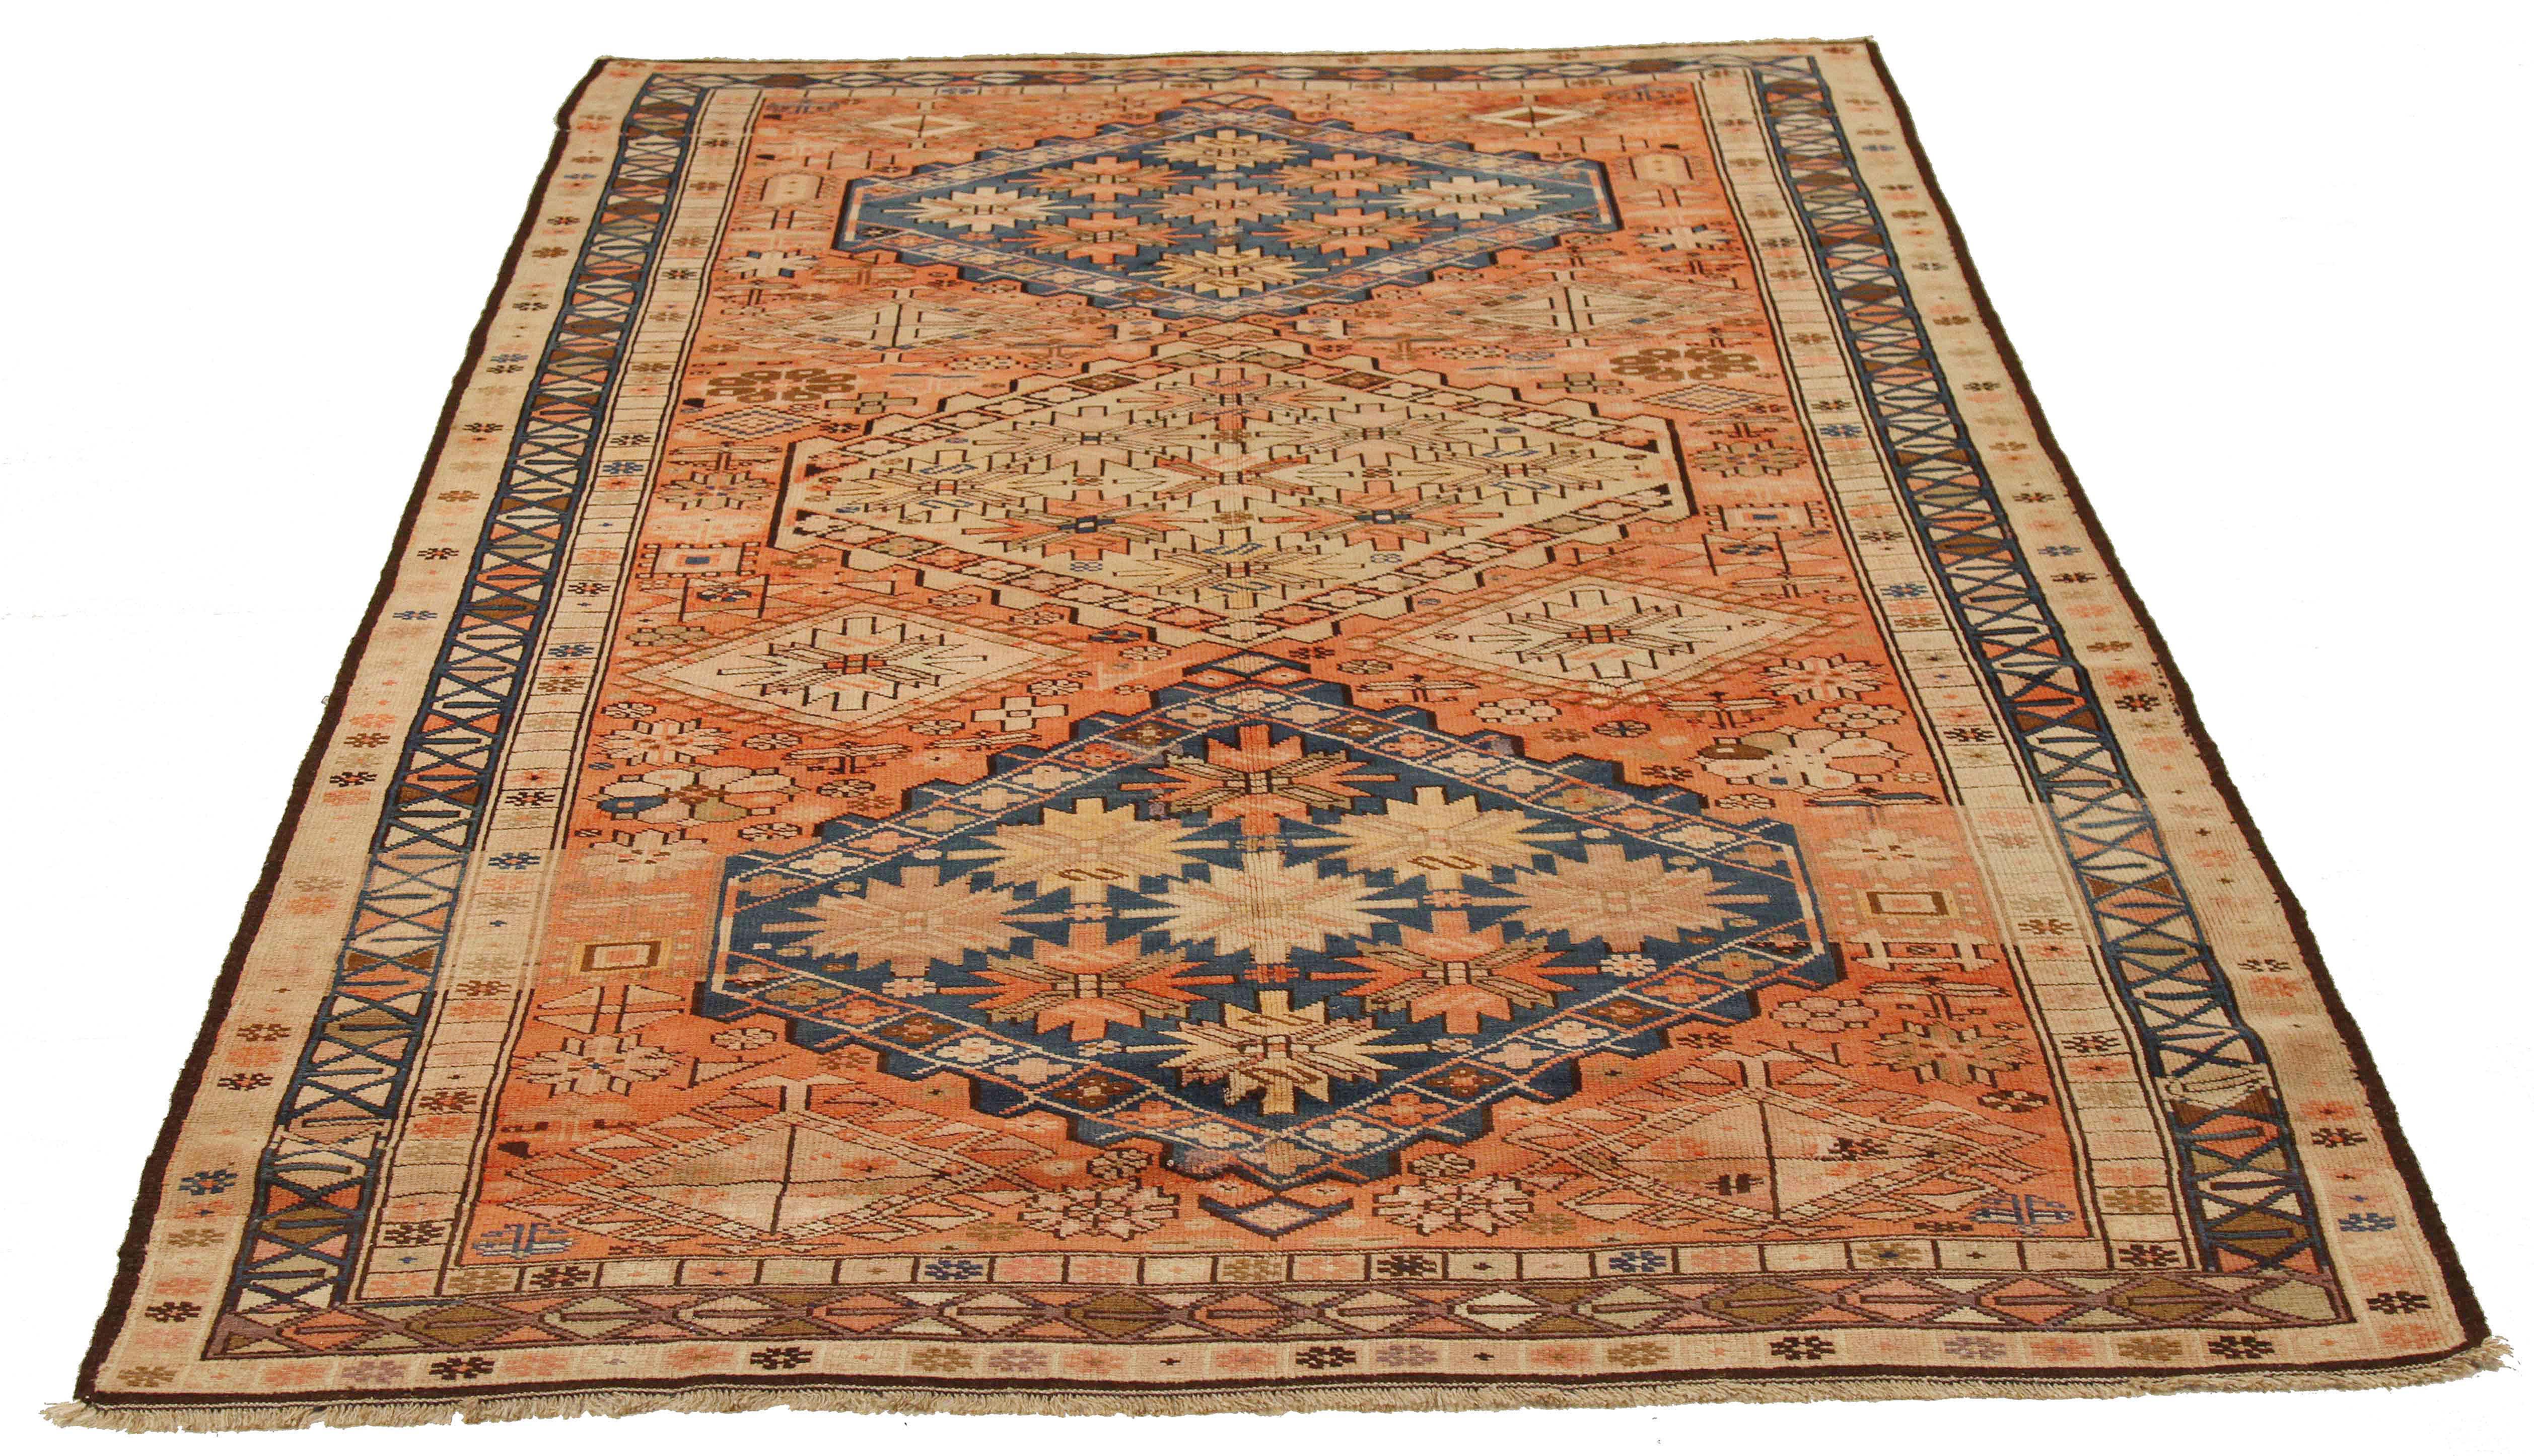 Antique Persian rug handwoven from the finest sheep’s wool and colored with all-natural vegetable dyes that are safe for humans and pets. It’s a traditional Karajeh design featuring floral medallions in navy and beige over a red-orange center field.